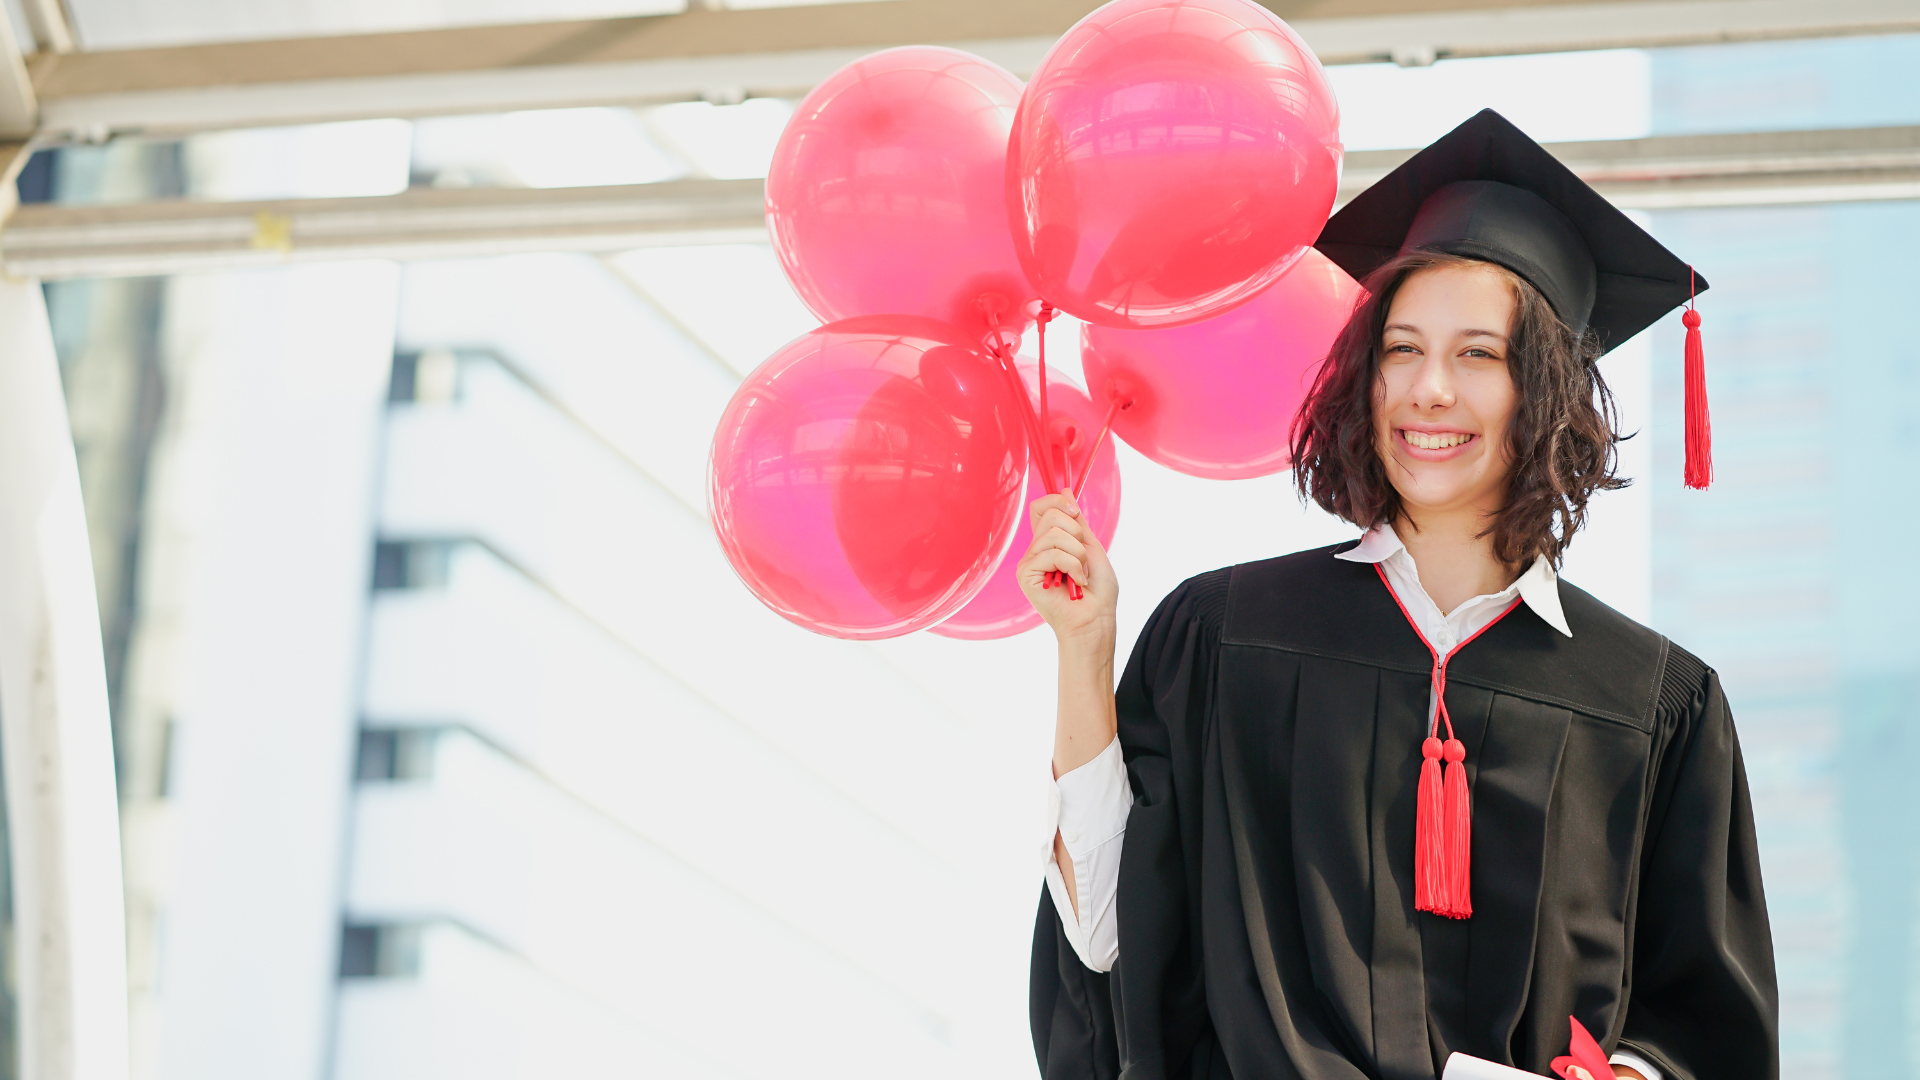 A woman in a graduation cap and gown is holding a bunch of pink balloons.